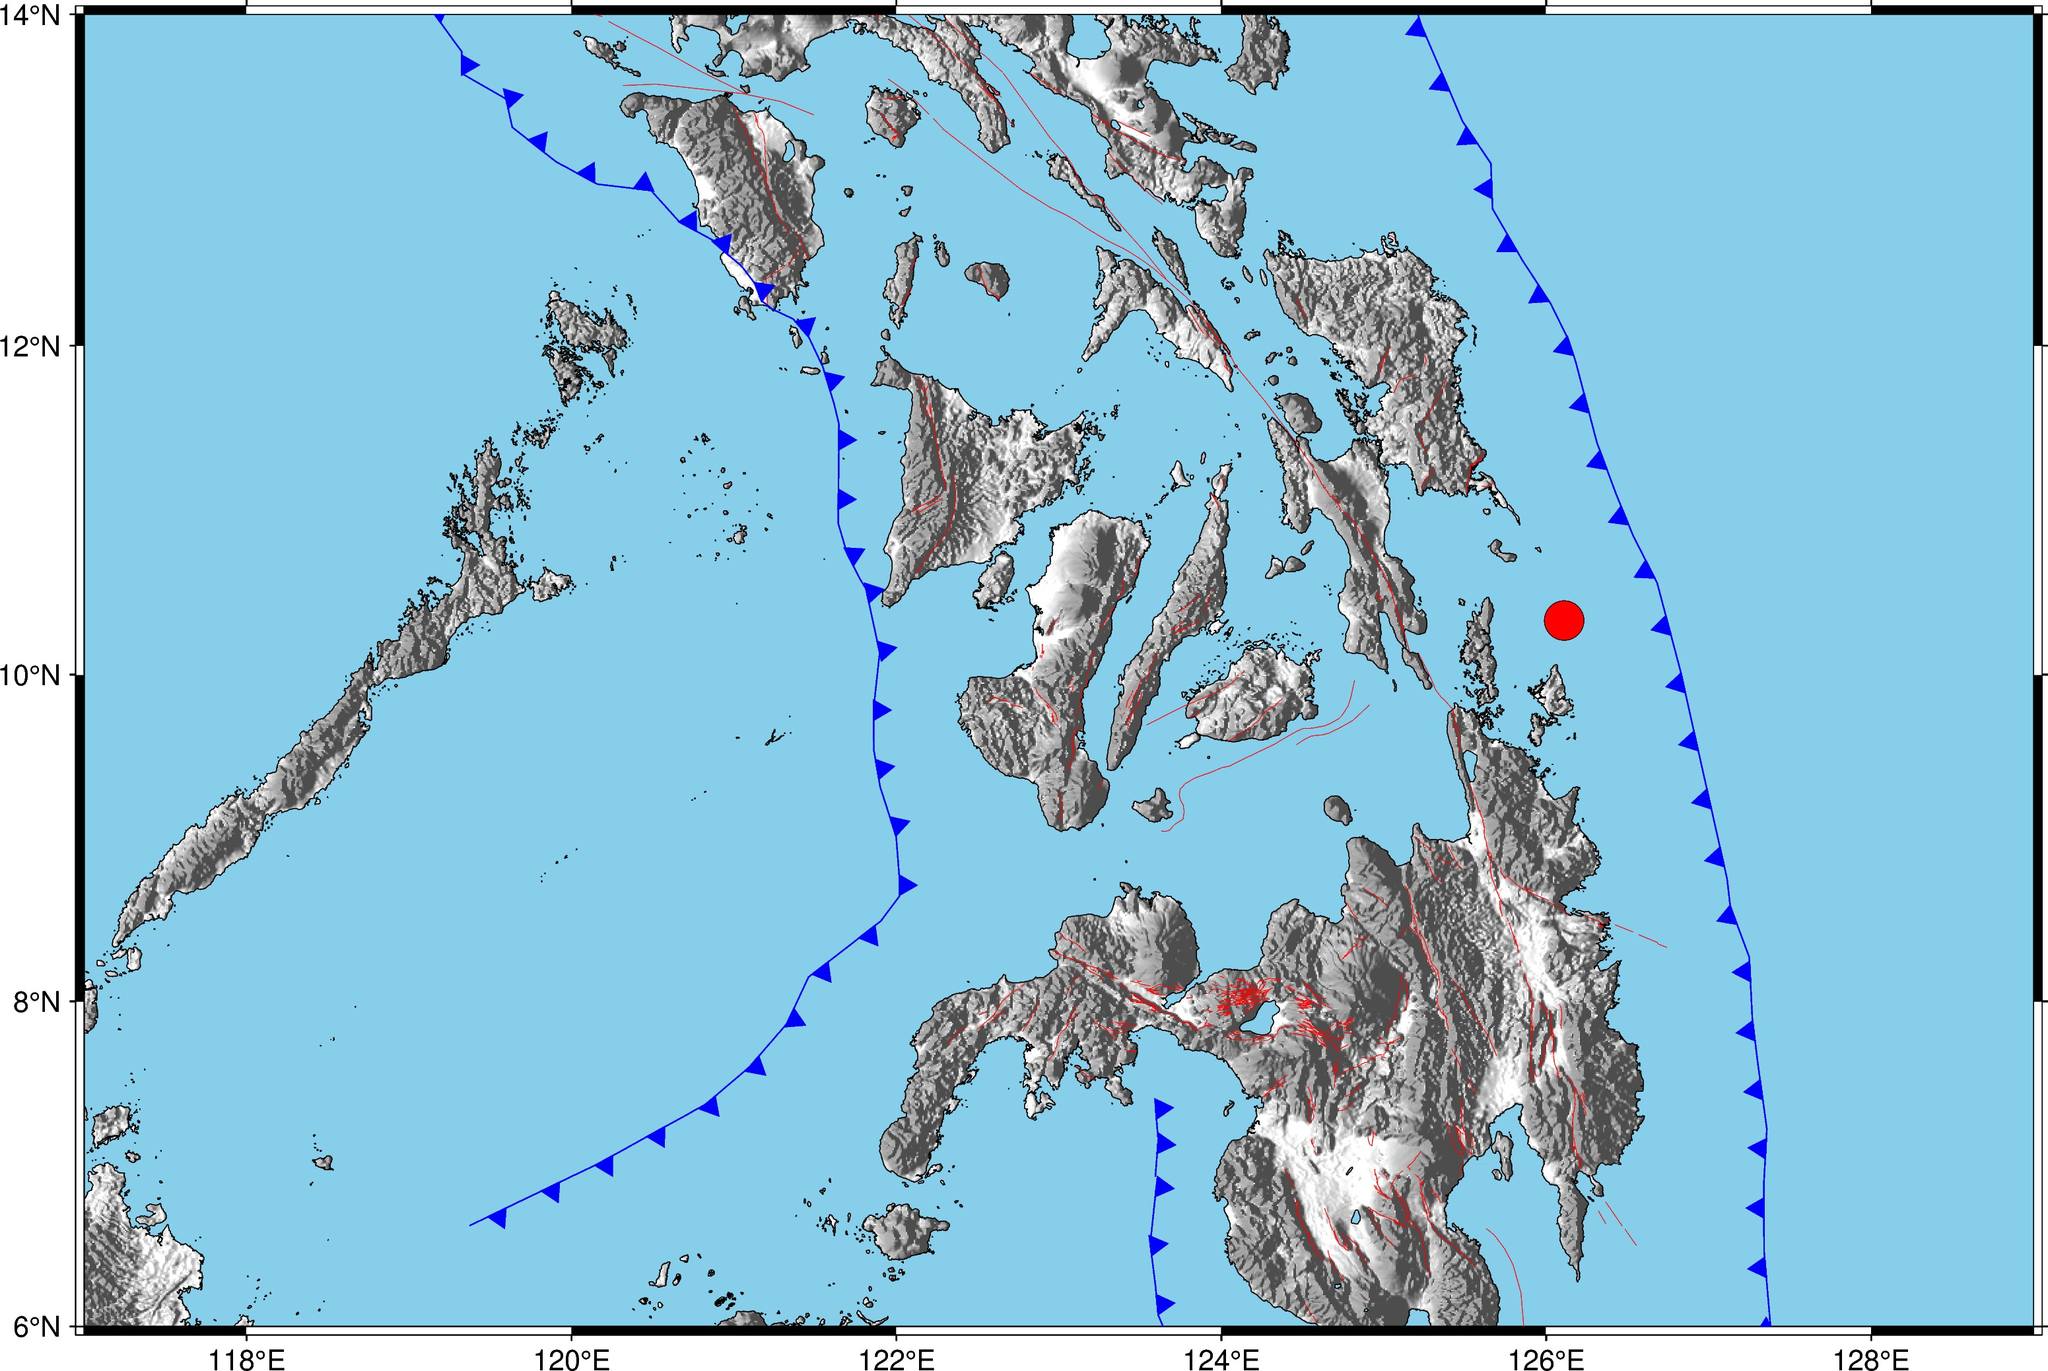 A magnitude-4.4 earthquake hit near the waters of Burgos, Surigao del Norte, on Wednesday afternoon, the Philippine Institute of Volcanology and Seismology (Phivolcs) said.